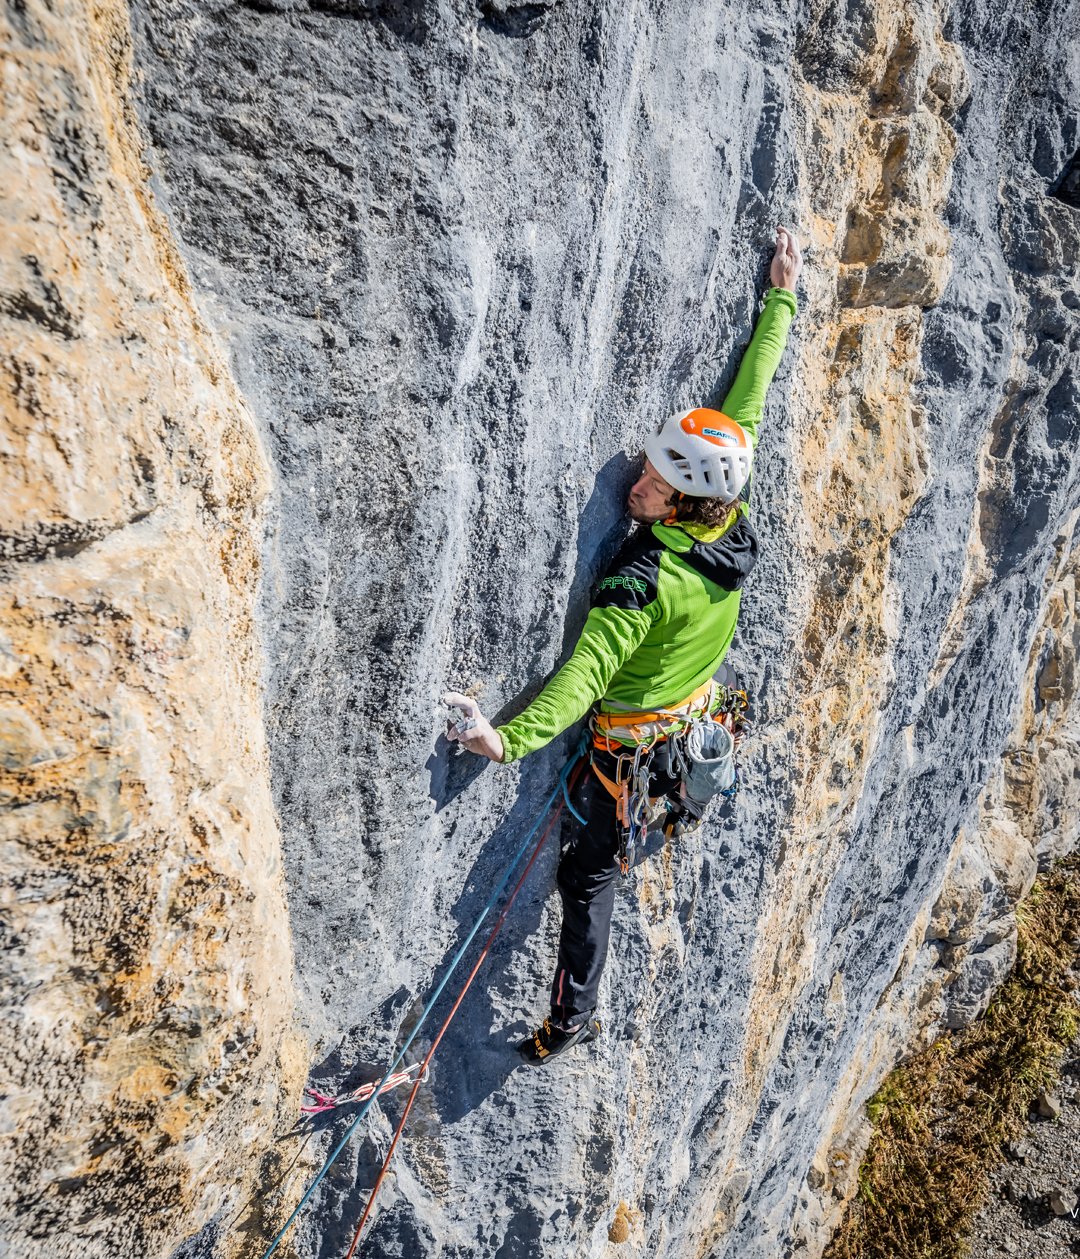  Silvan Schüpbach on pitch one of Tradündition, an eight-pitch traditionally protected 8a on the limestone west face of the Dündenhorn, Switzerland. 